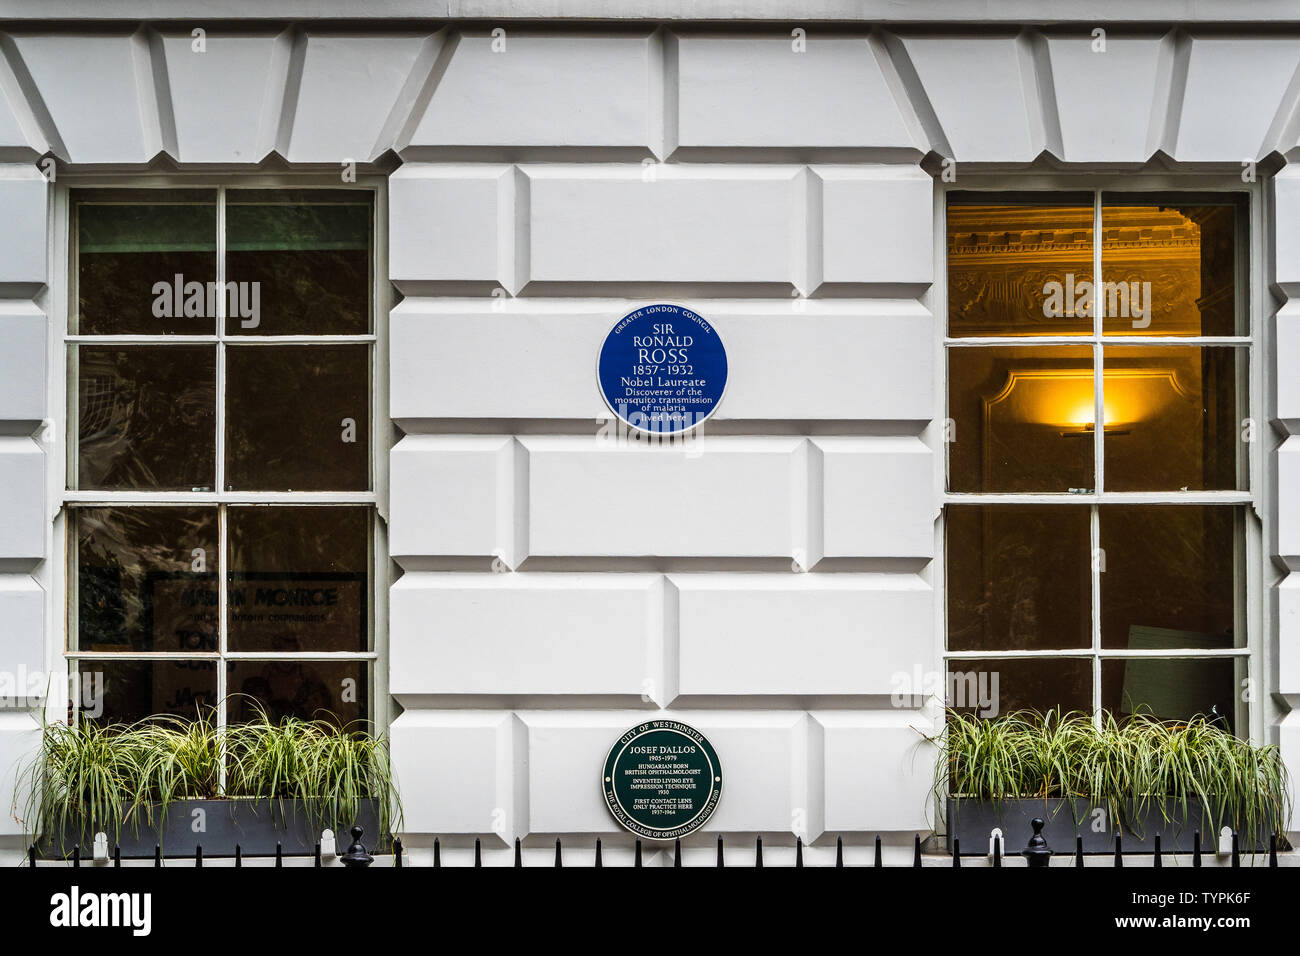 Sir Ronald Ross 1857-1932, discoverer of the mosquito transmission of Malaria, lived at this house at 18 Cavendish Square, Marylebone. GLC Blue Plaque Stock Photo